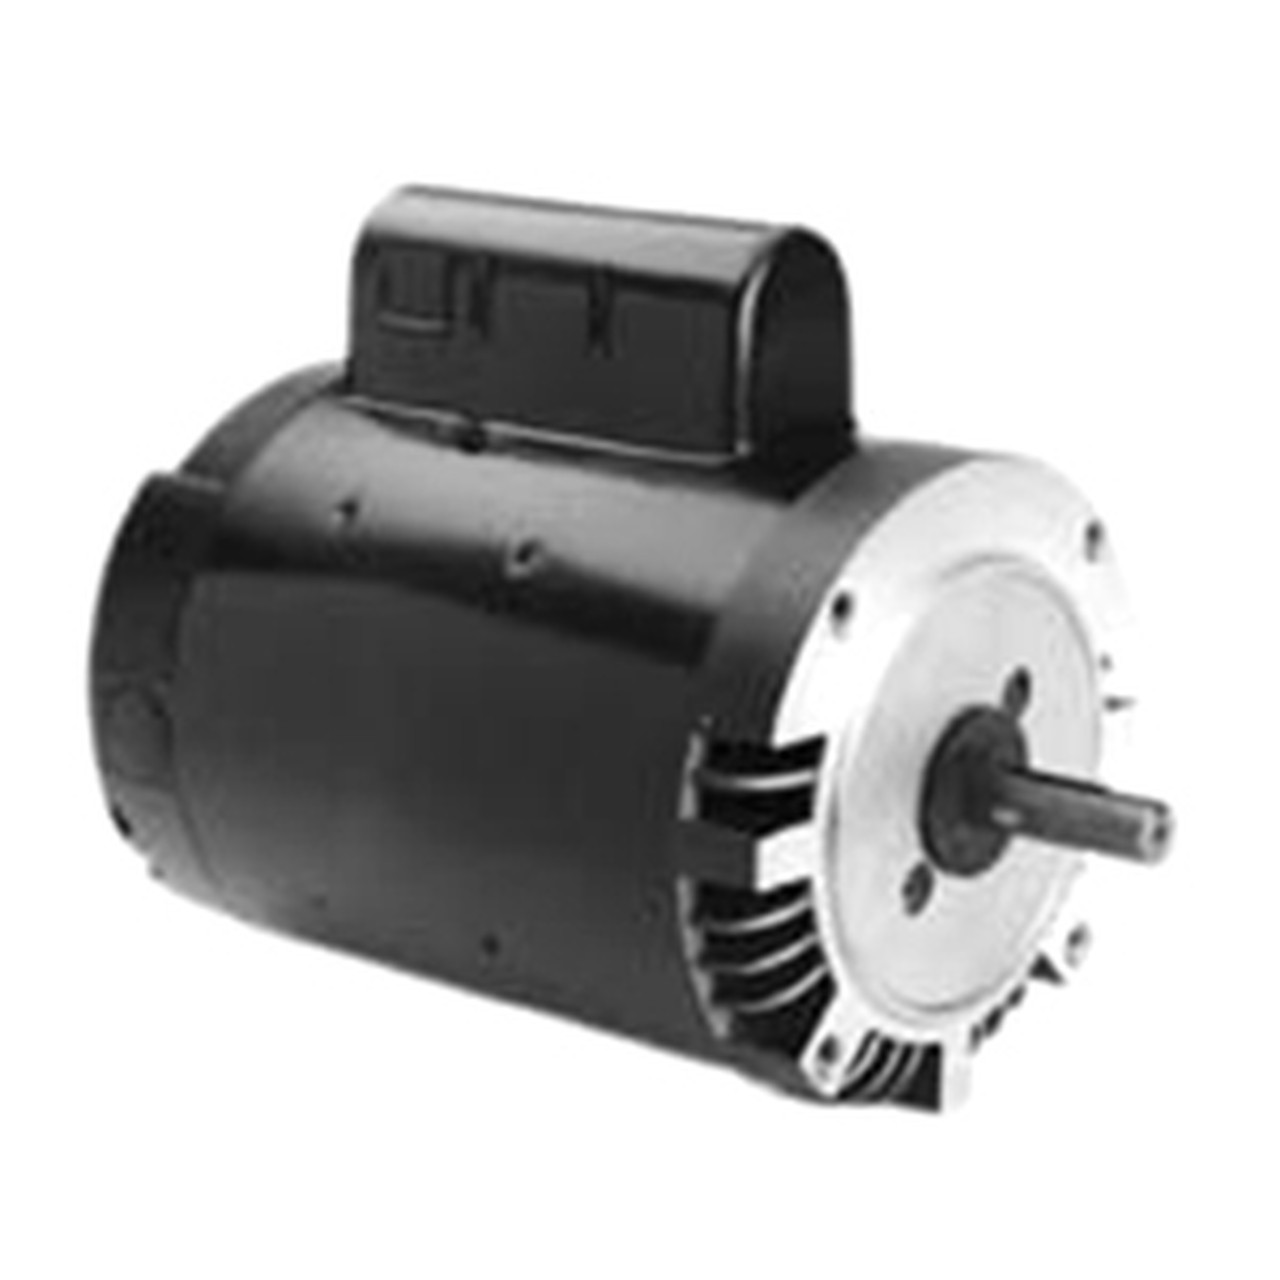 Century Full-Rated Pool and Spa Pump Motor; 1.5 HP, 3450 RPM, 115/230 V, 56C, Keyed Shaft